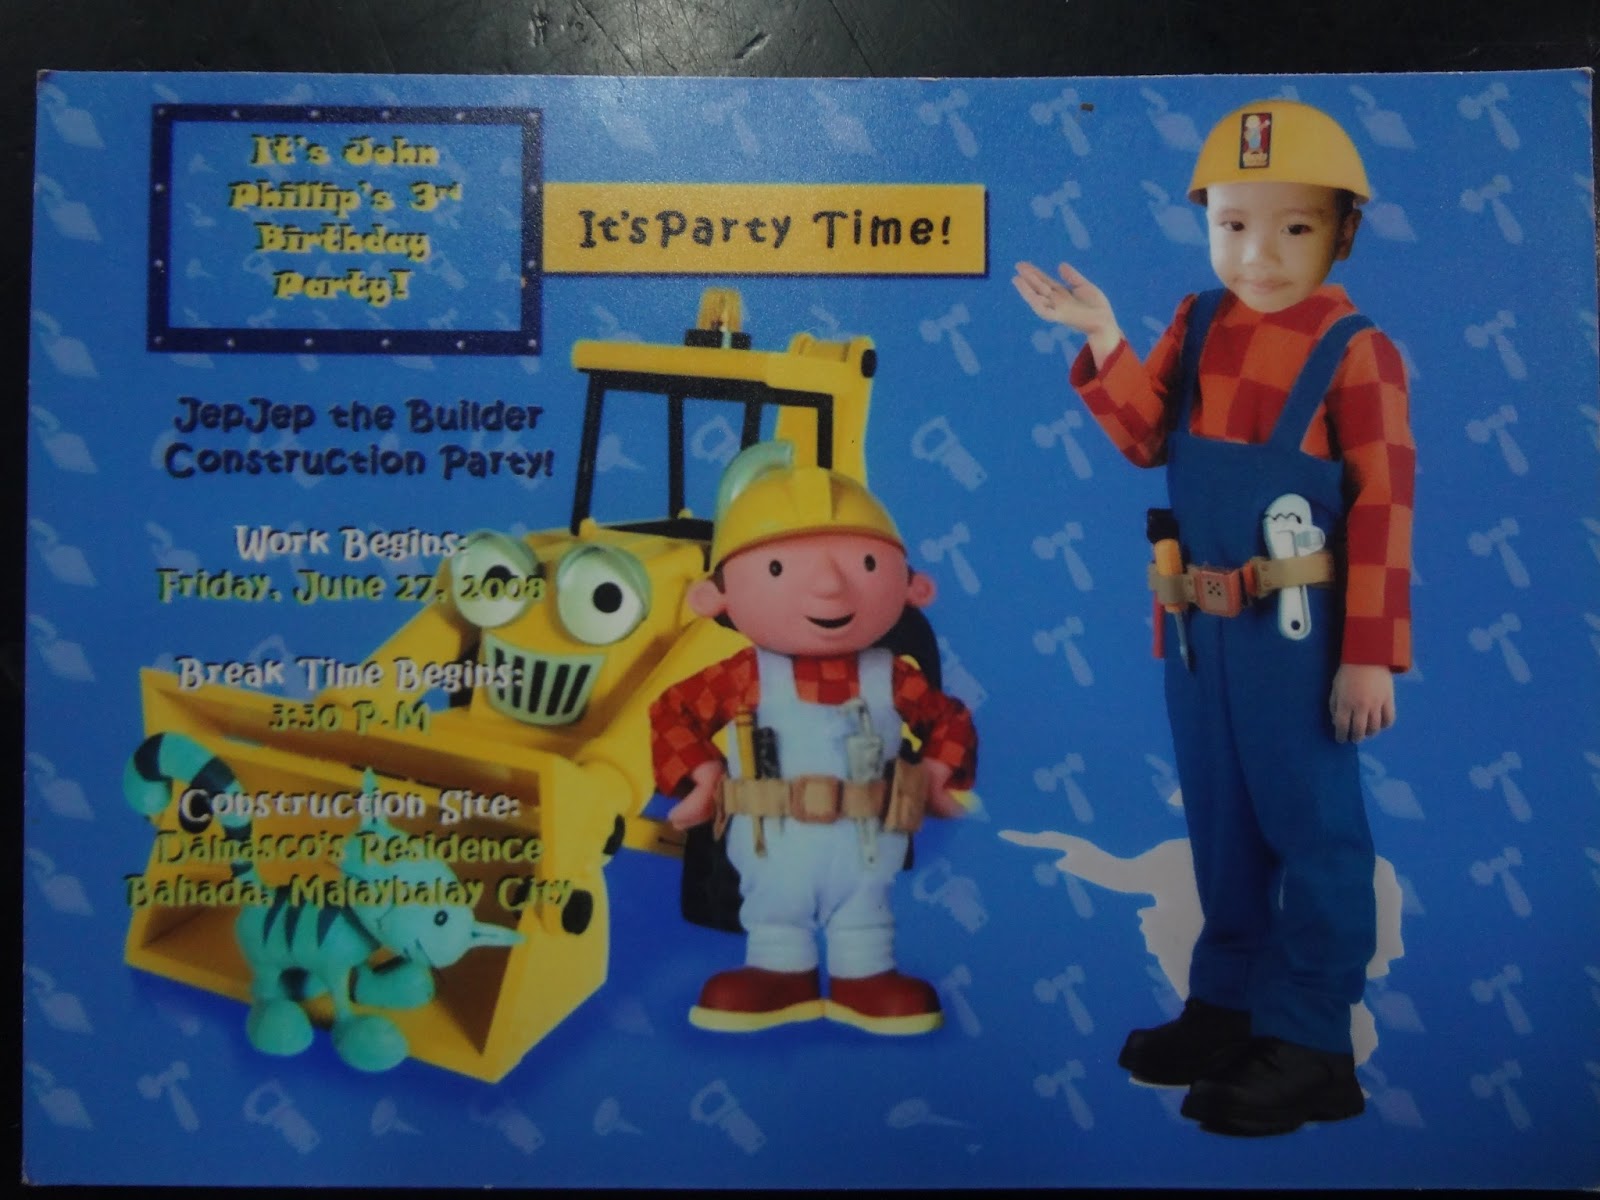 The How To Bob Builder Party